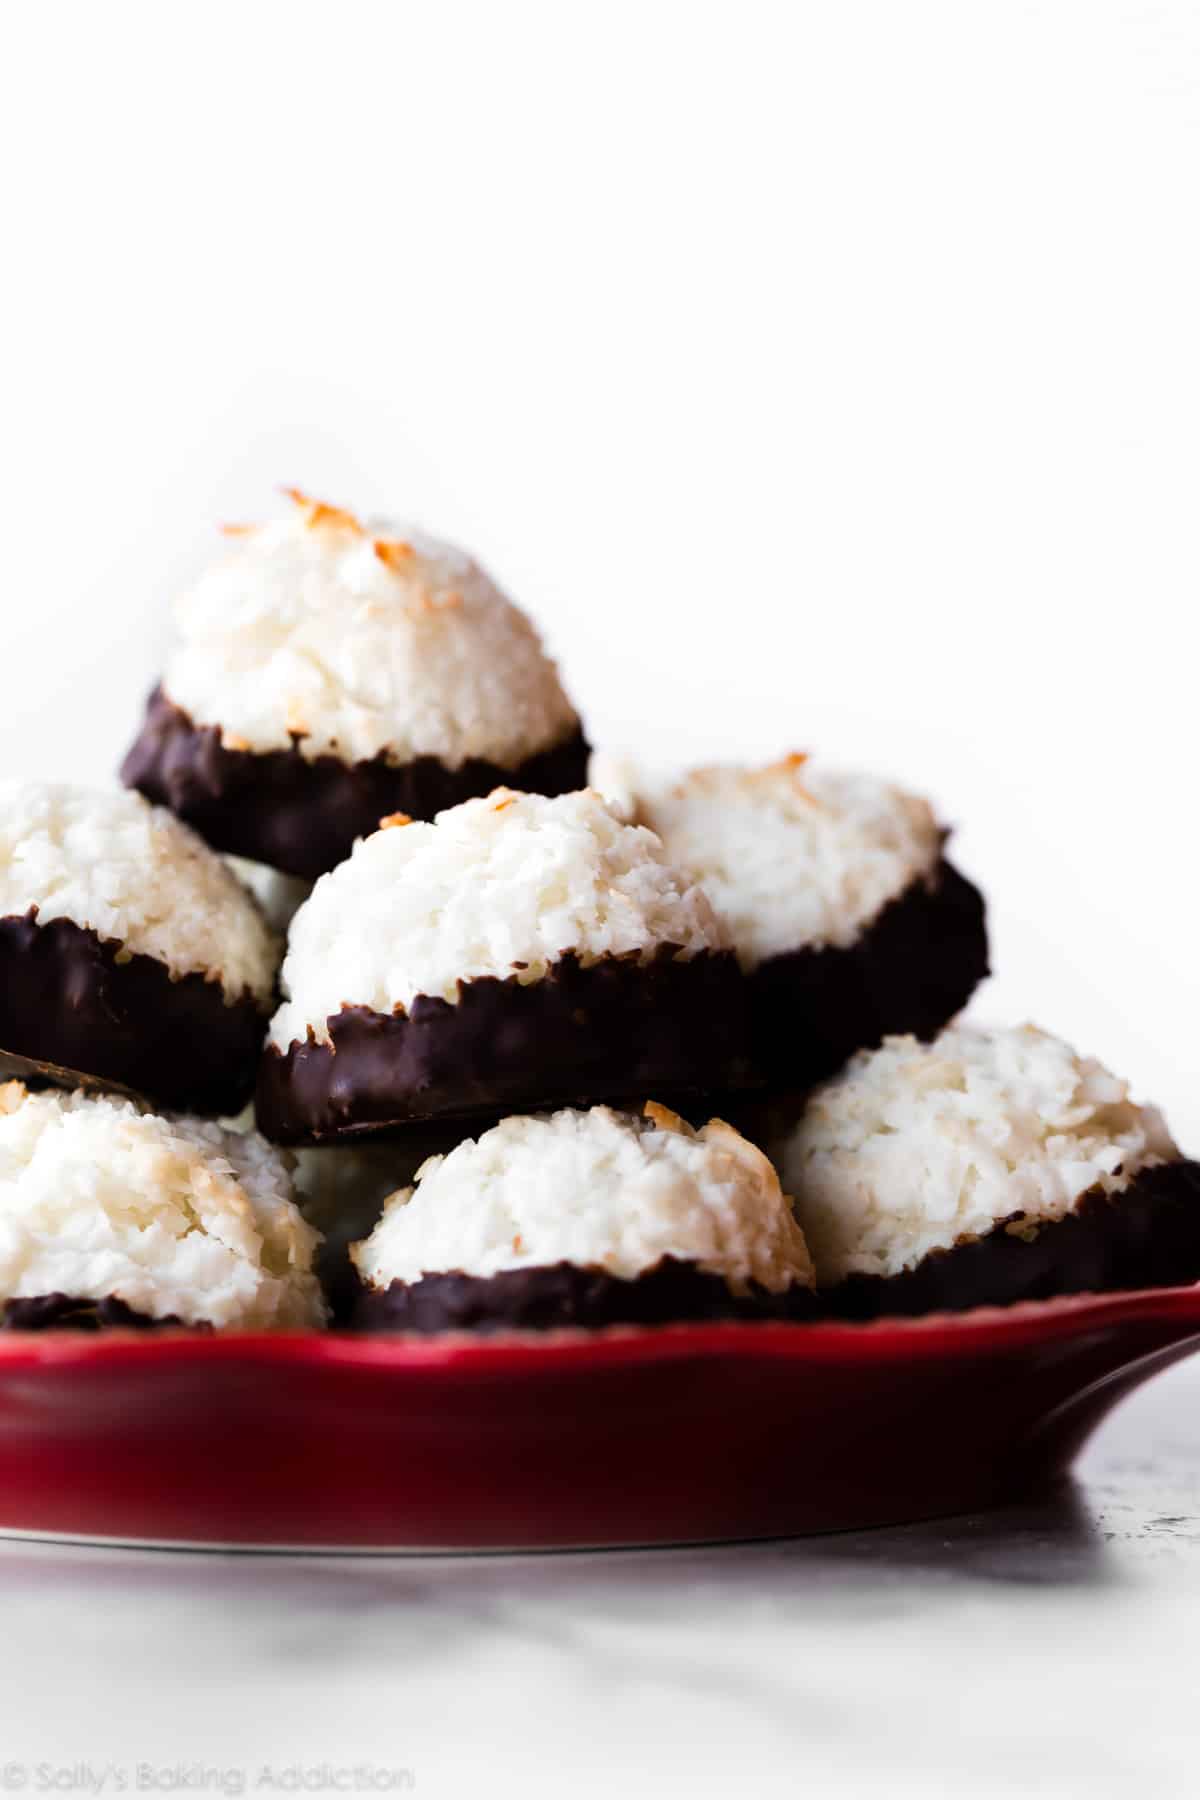 stack of coconut macaroons dipped in dark chocolate on a red plate